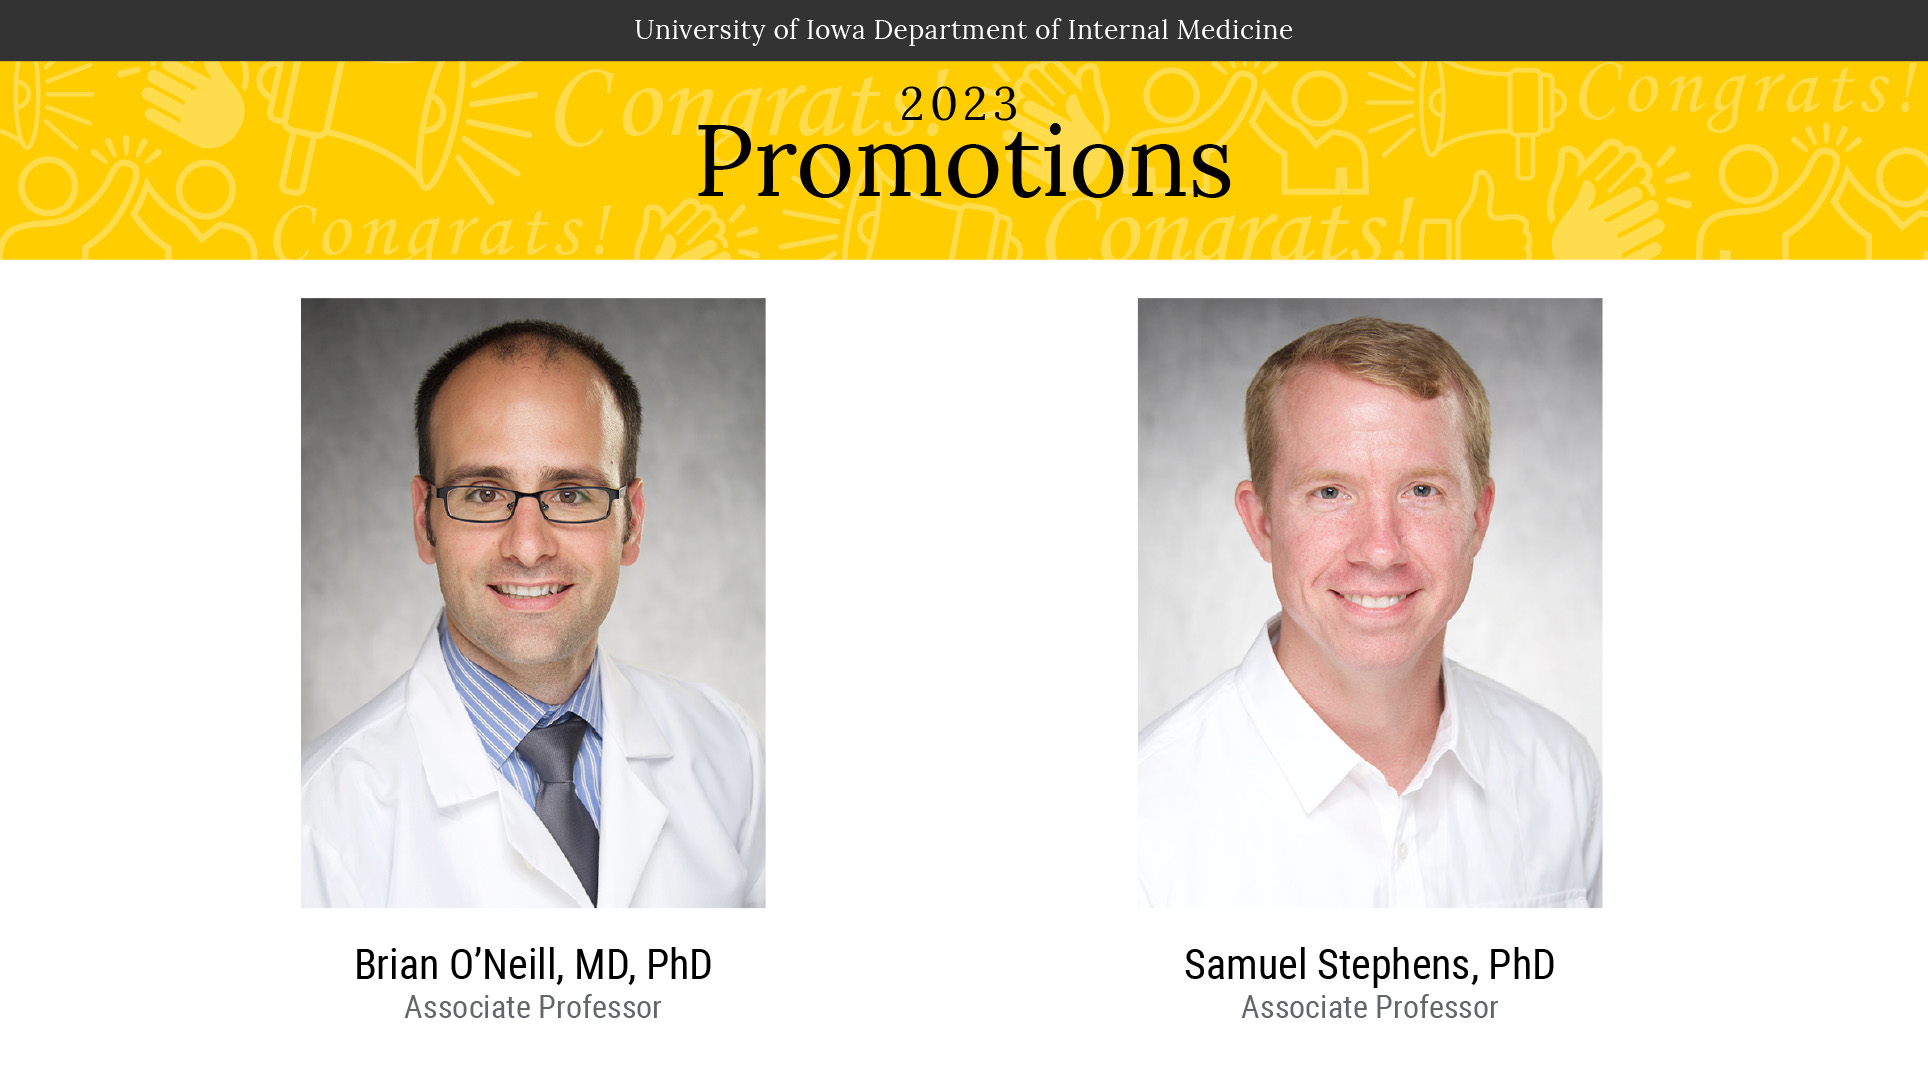 Faculty Promotions